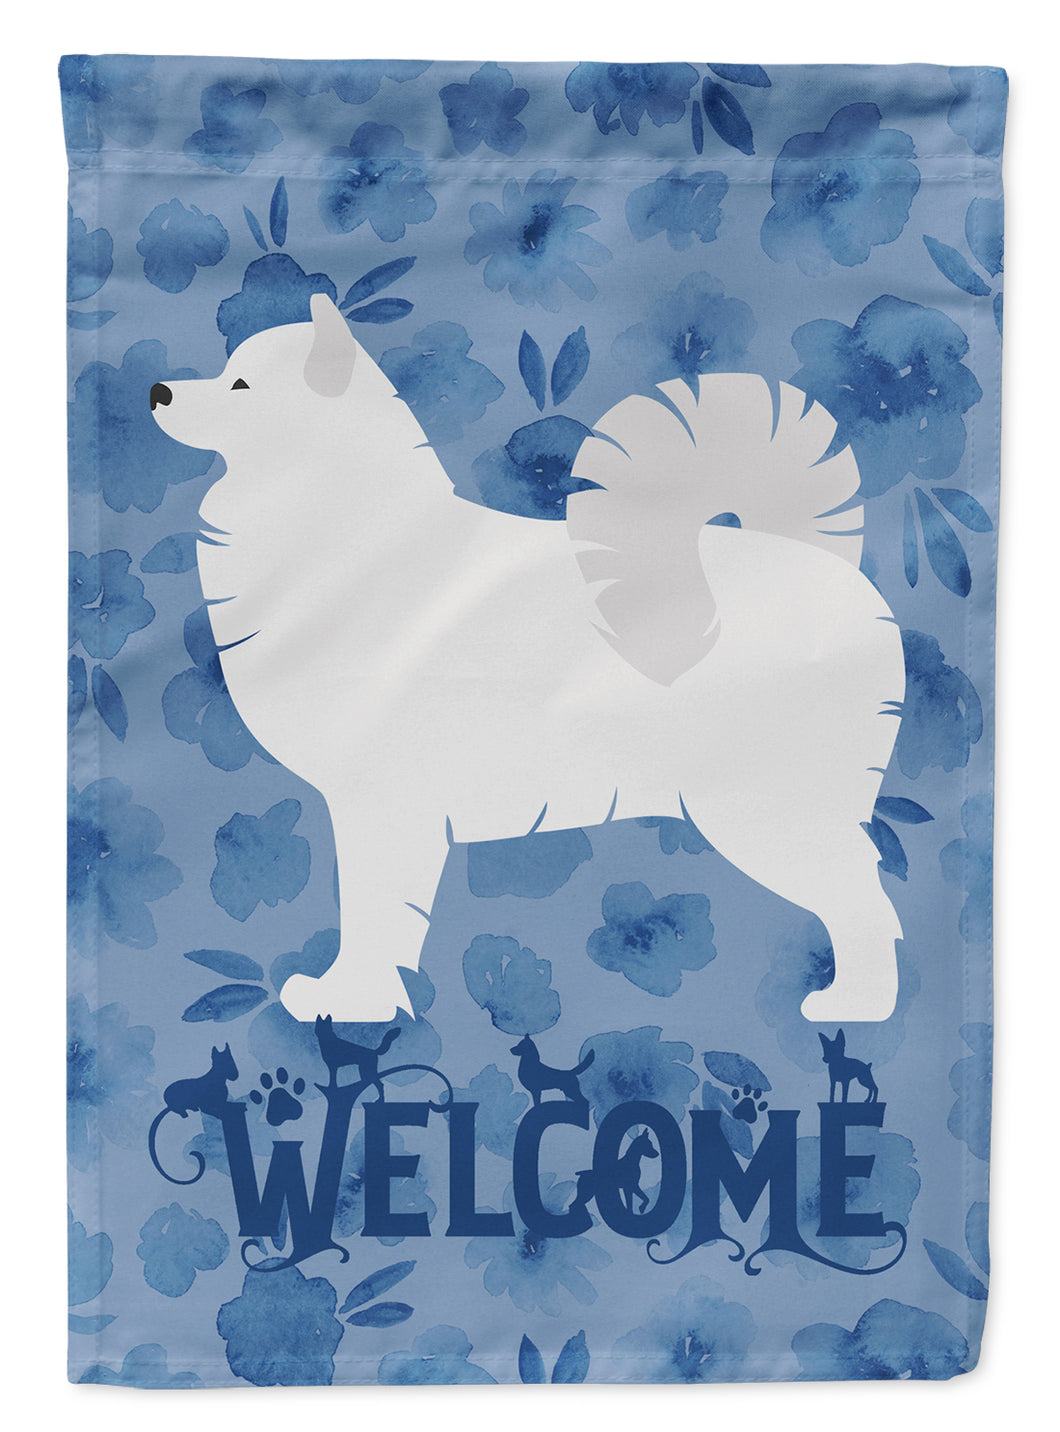 Samoyed Welcome Garden Flag 2-Sided 2-Ply